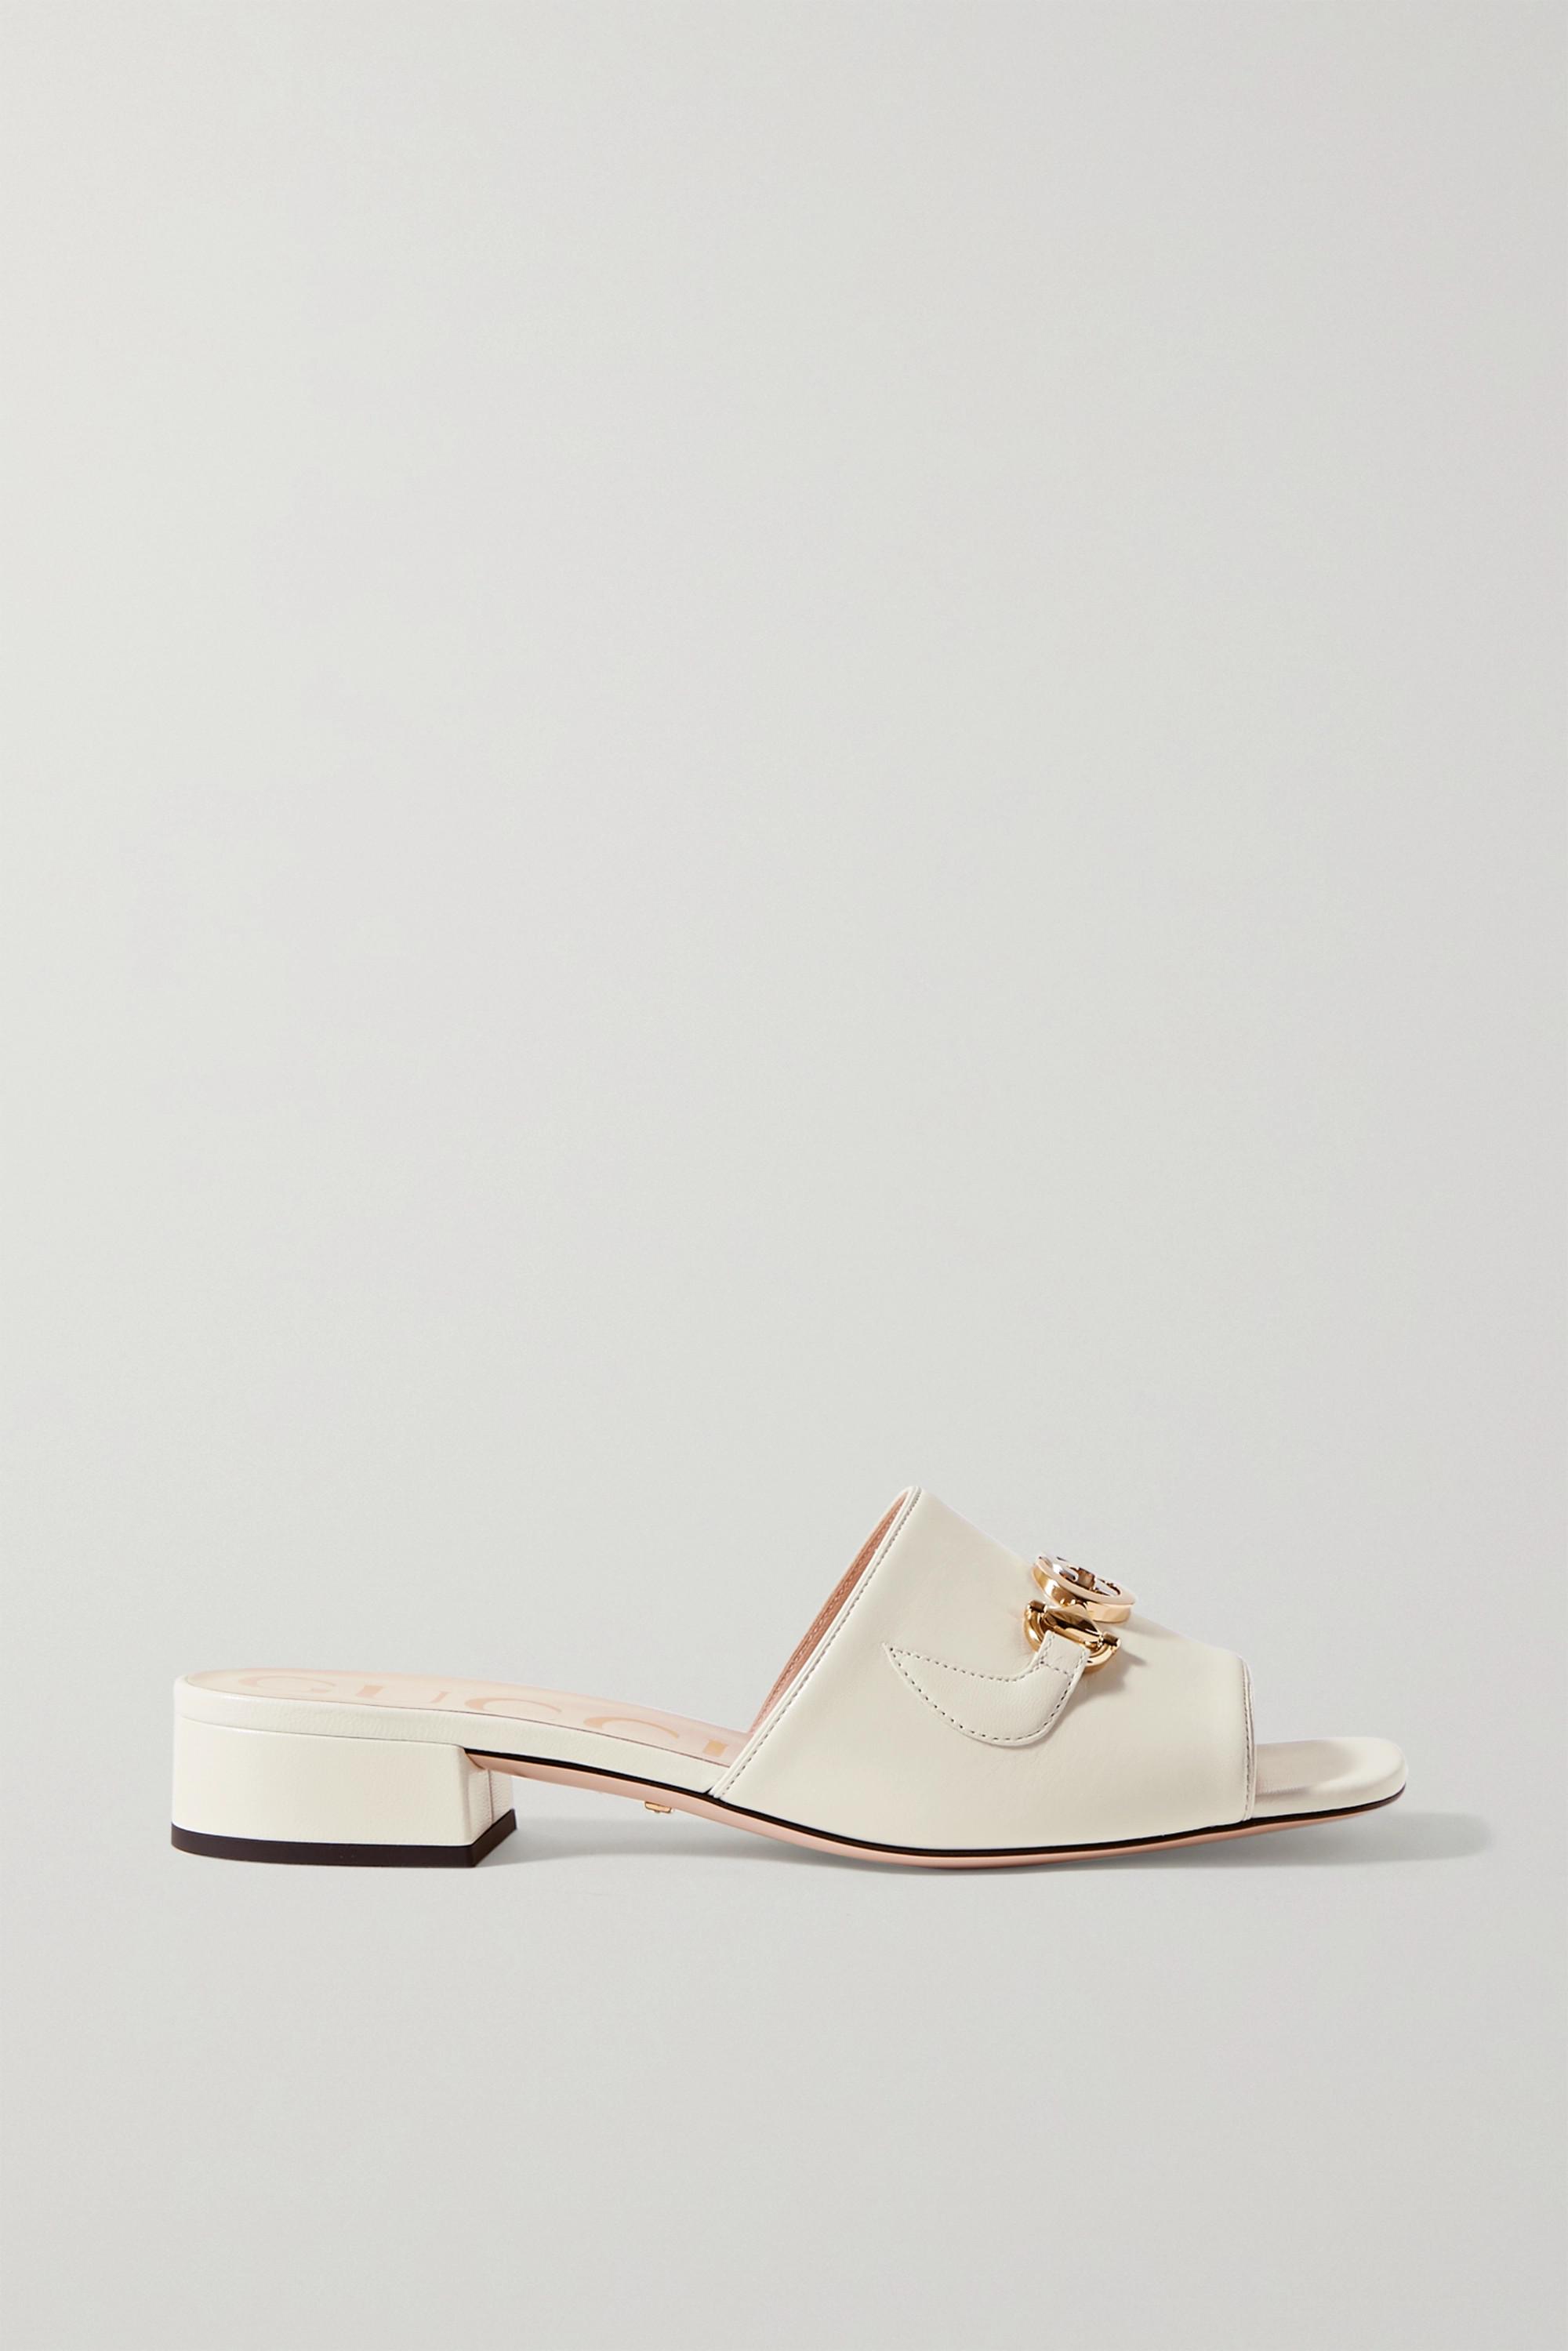 Gucci Zumi Embellished Leather Mules in White | Lyst